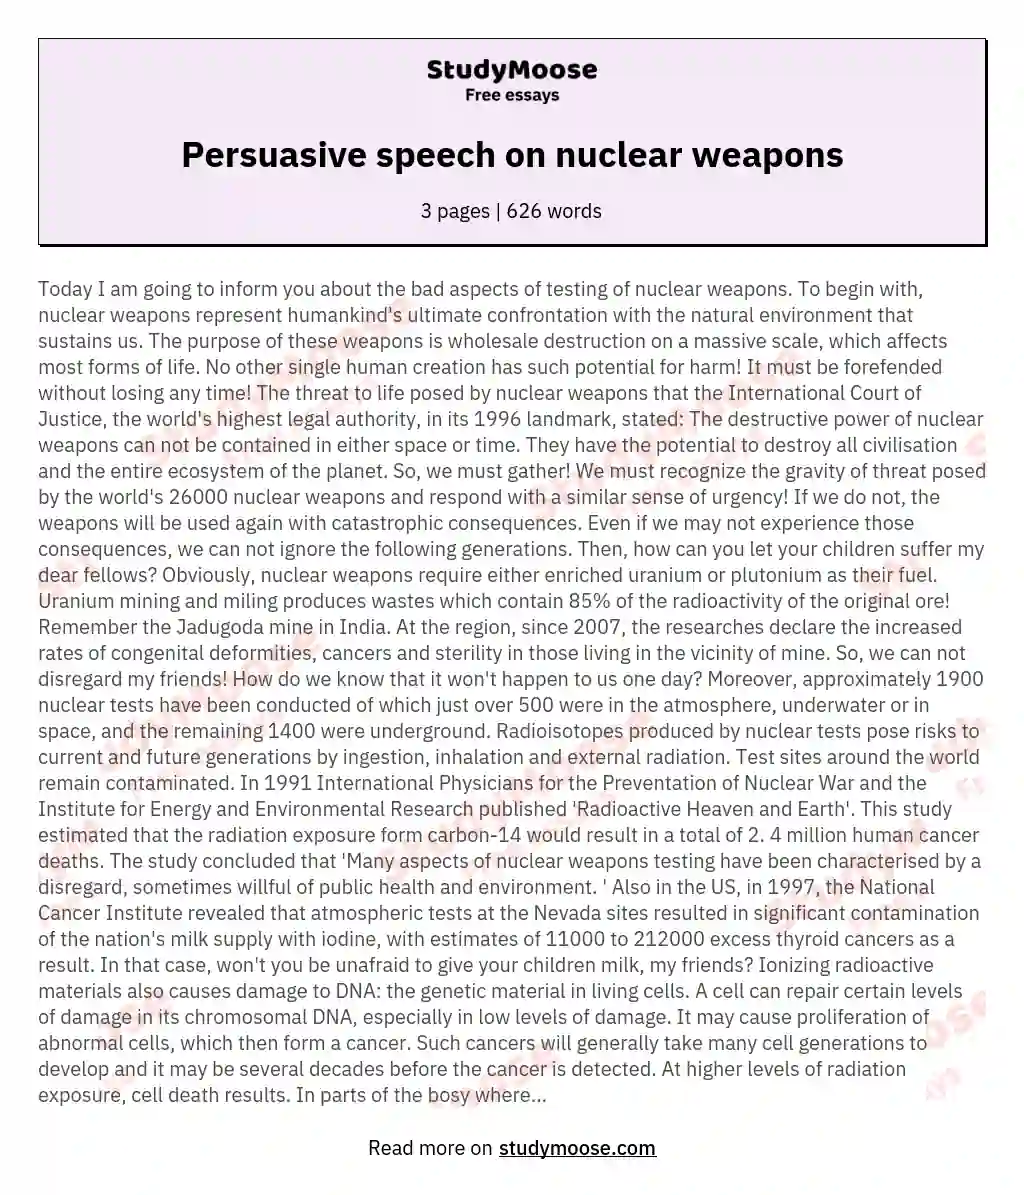 Persuasive speech on nuclear weapons